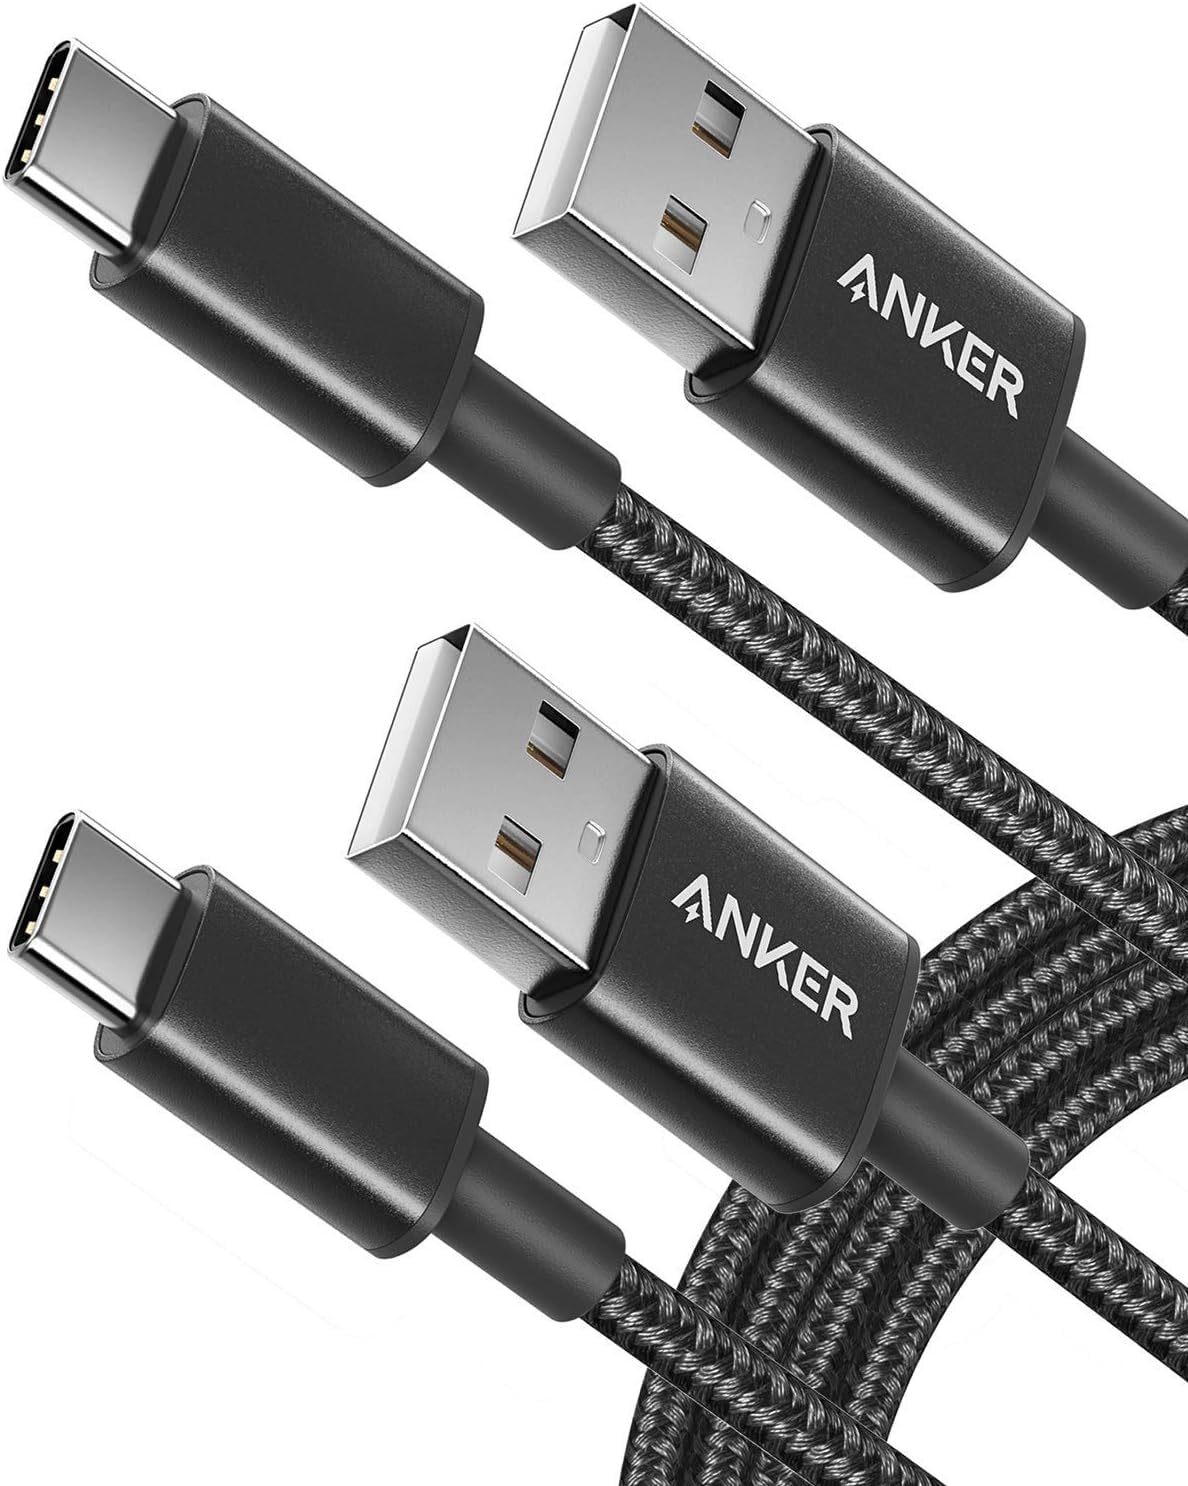 Cable 2 Pack 6ft Premium USB A to C Charger Cable for Samsung Galaxy S10 S10 Not - $23.50